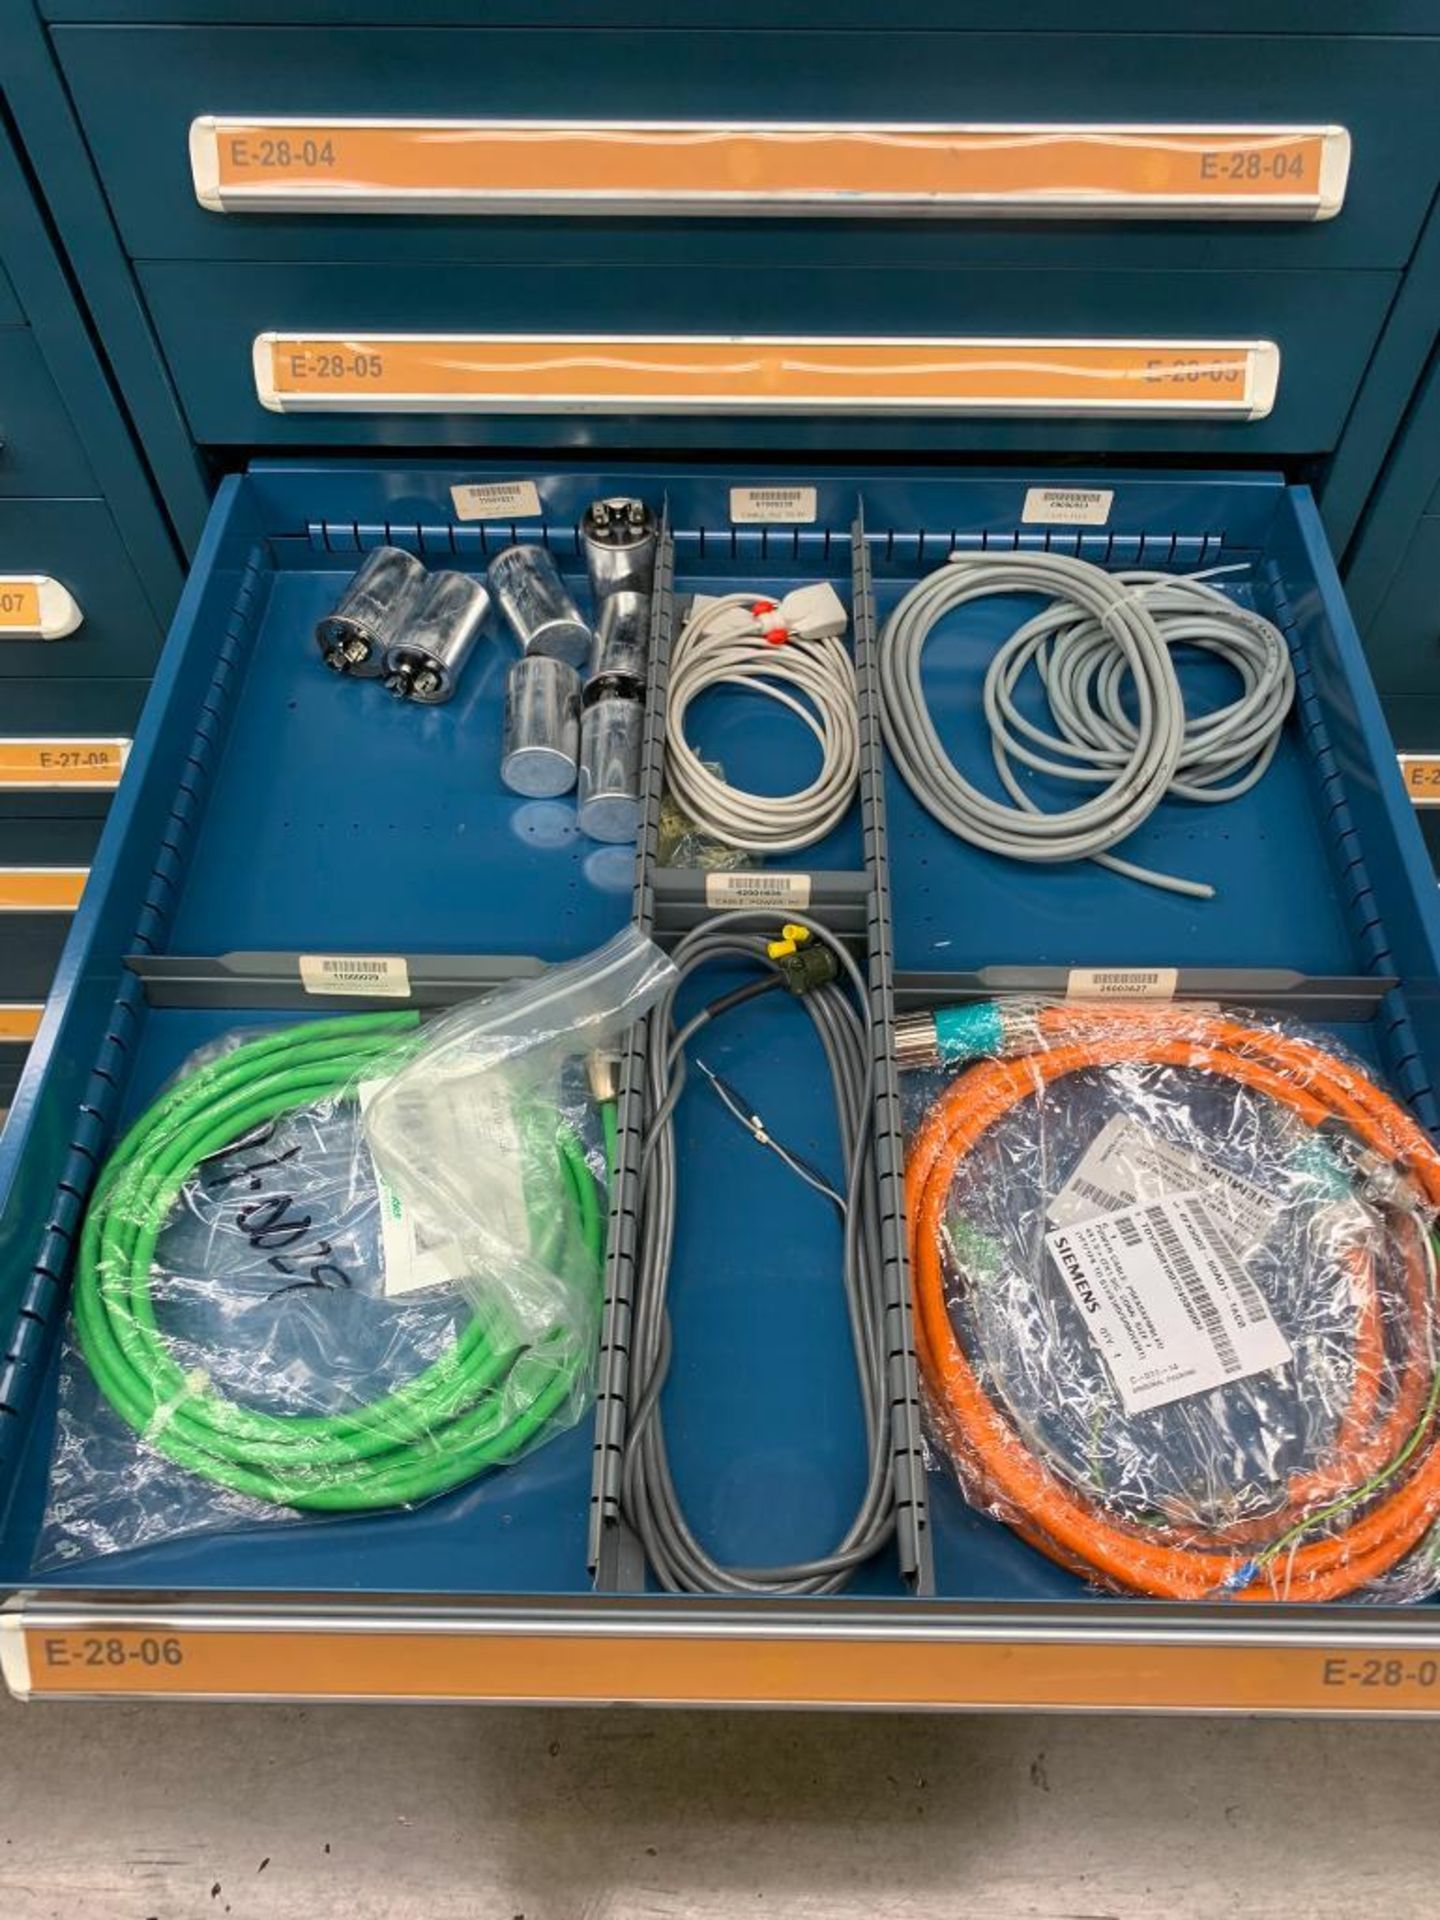 Vidmar 10-Drawer Cabinet w/ Assorted Cable Assemblies, Timers, Wire Harnesses - Image 11 of 16